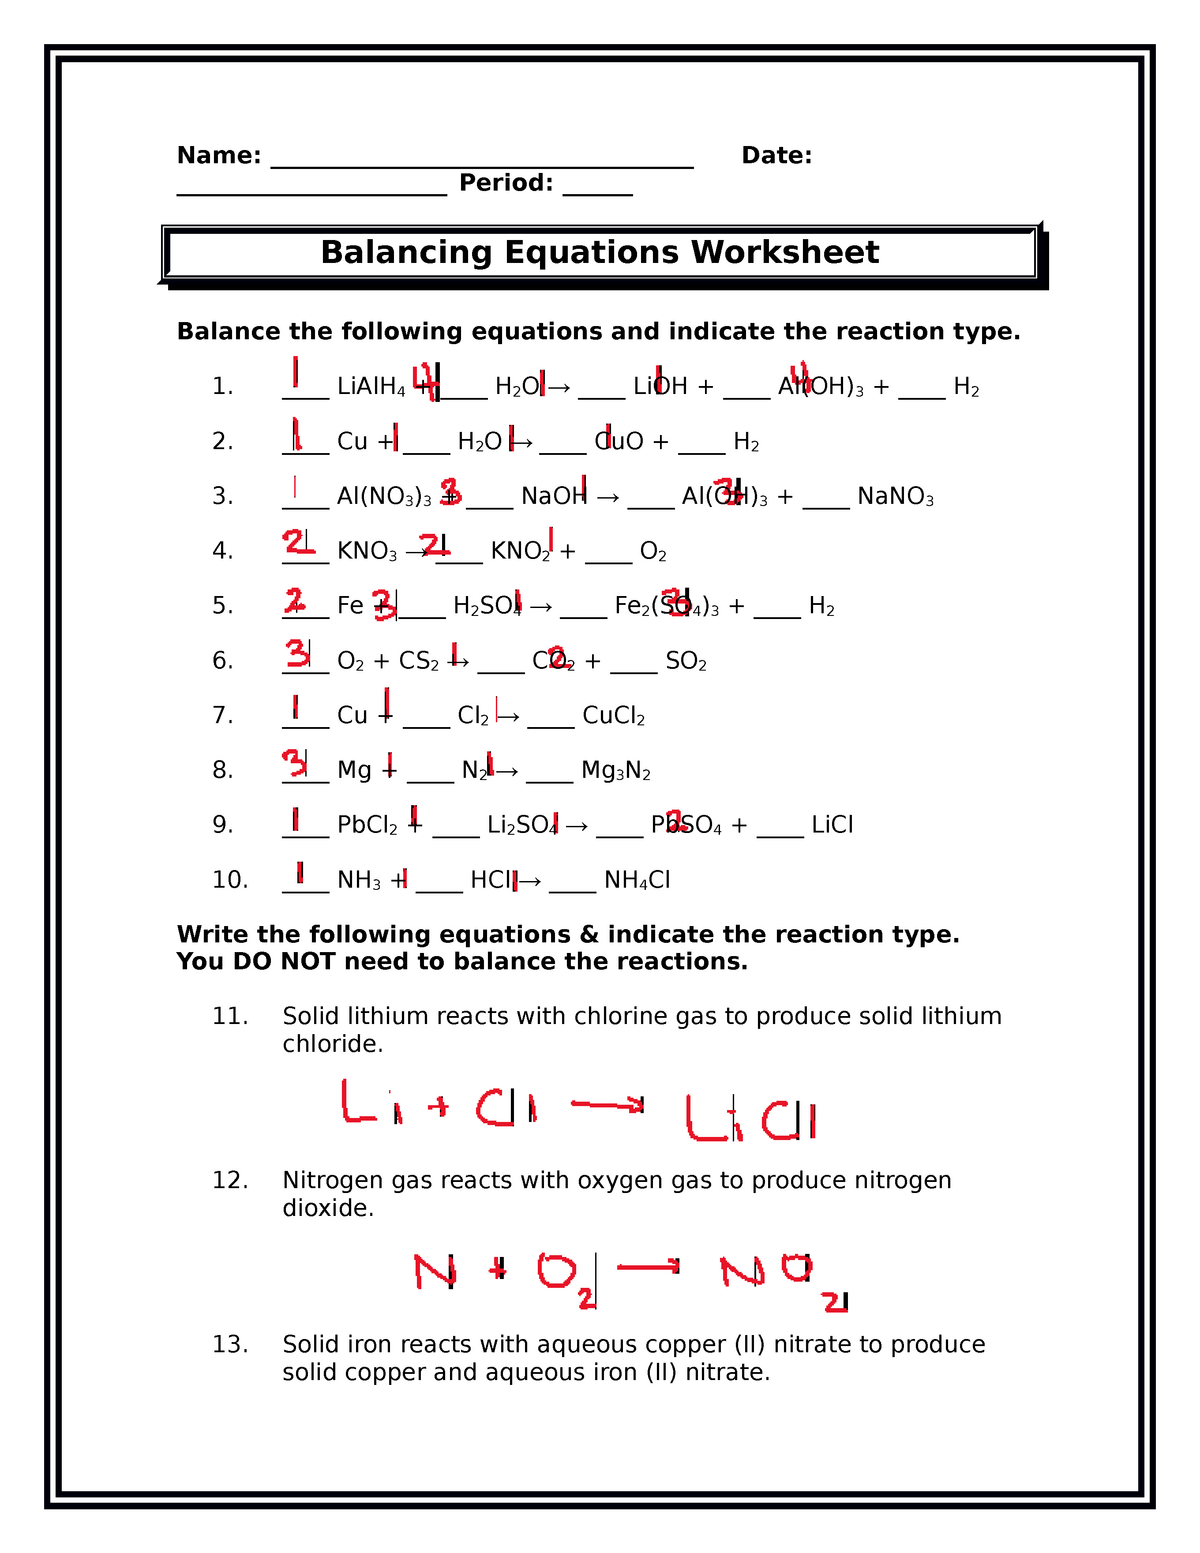 chemistry-balancing-equations-worksheet-2-answer-key-1-some-of-the